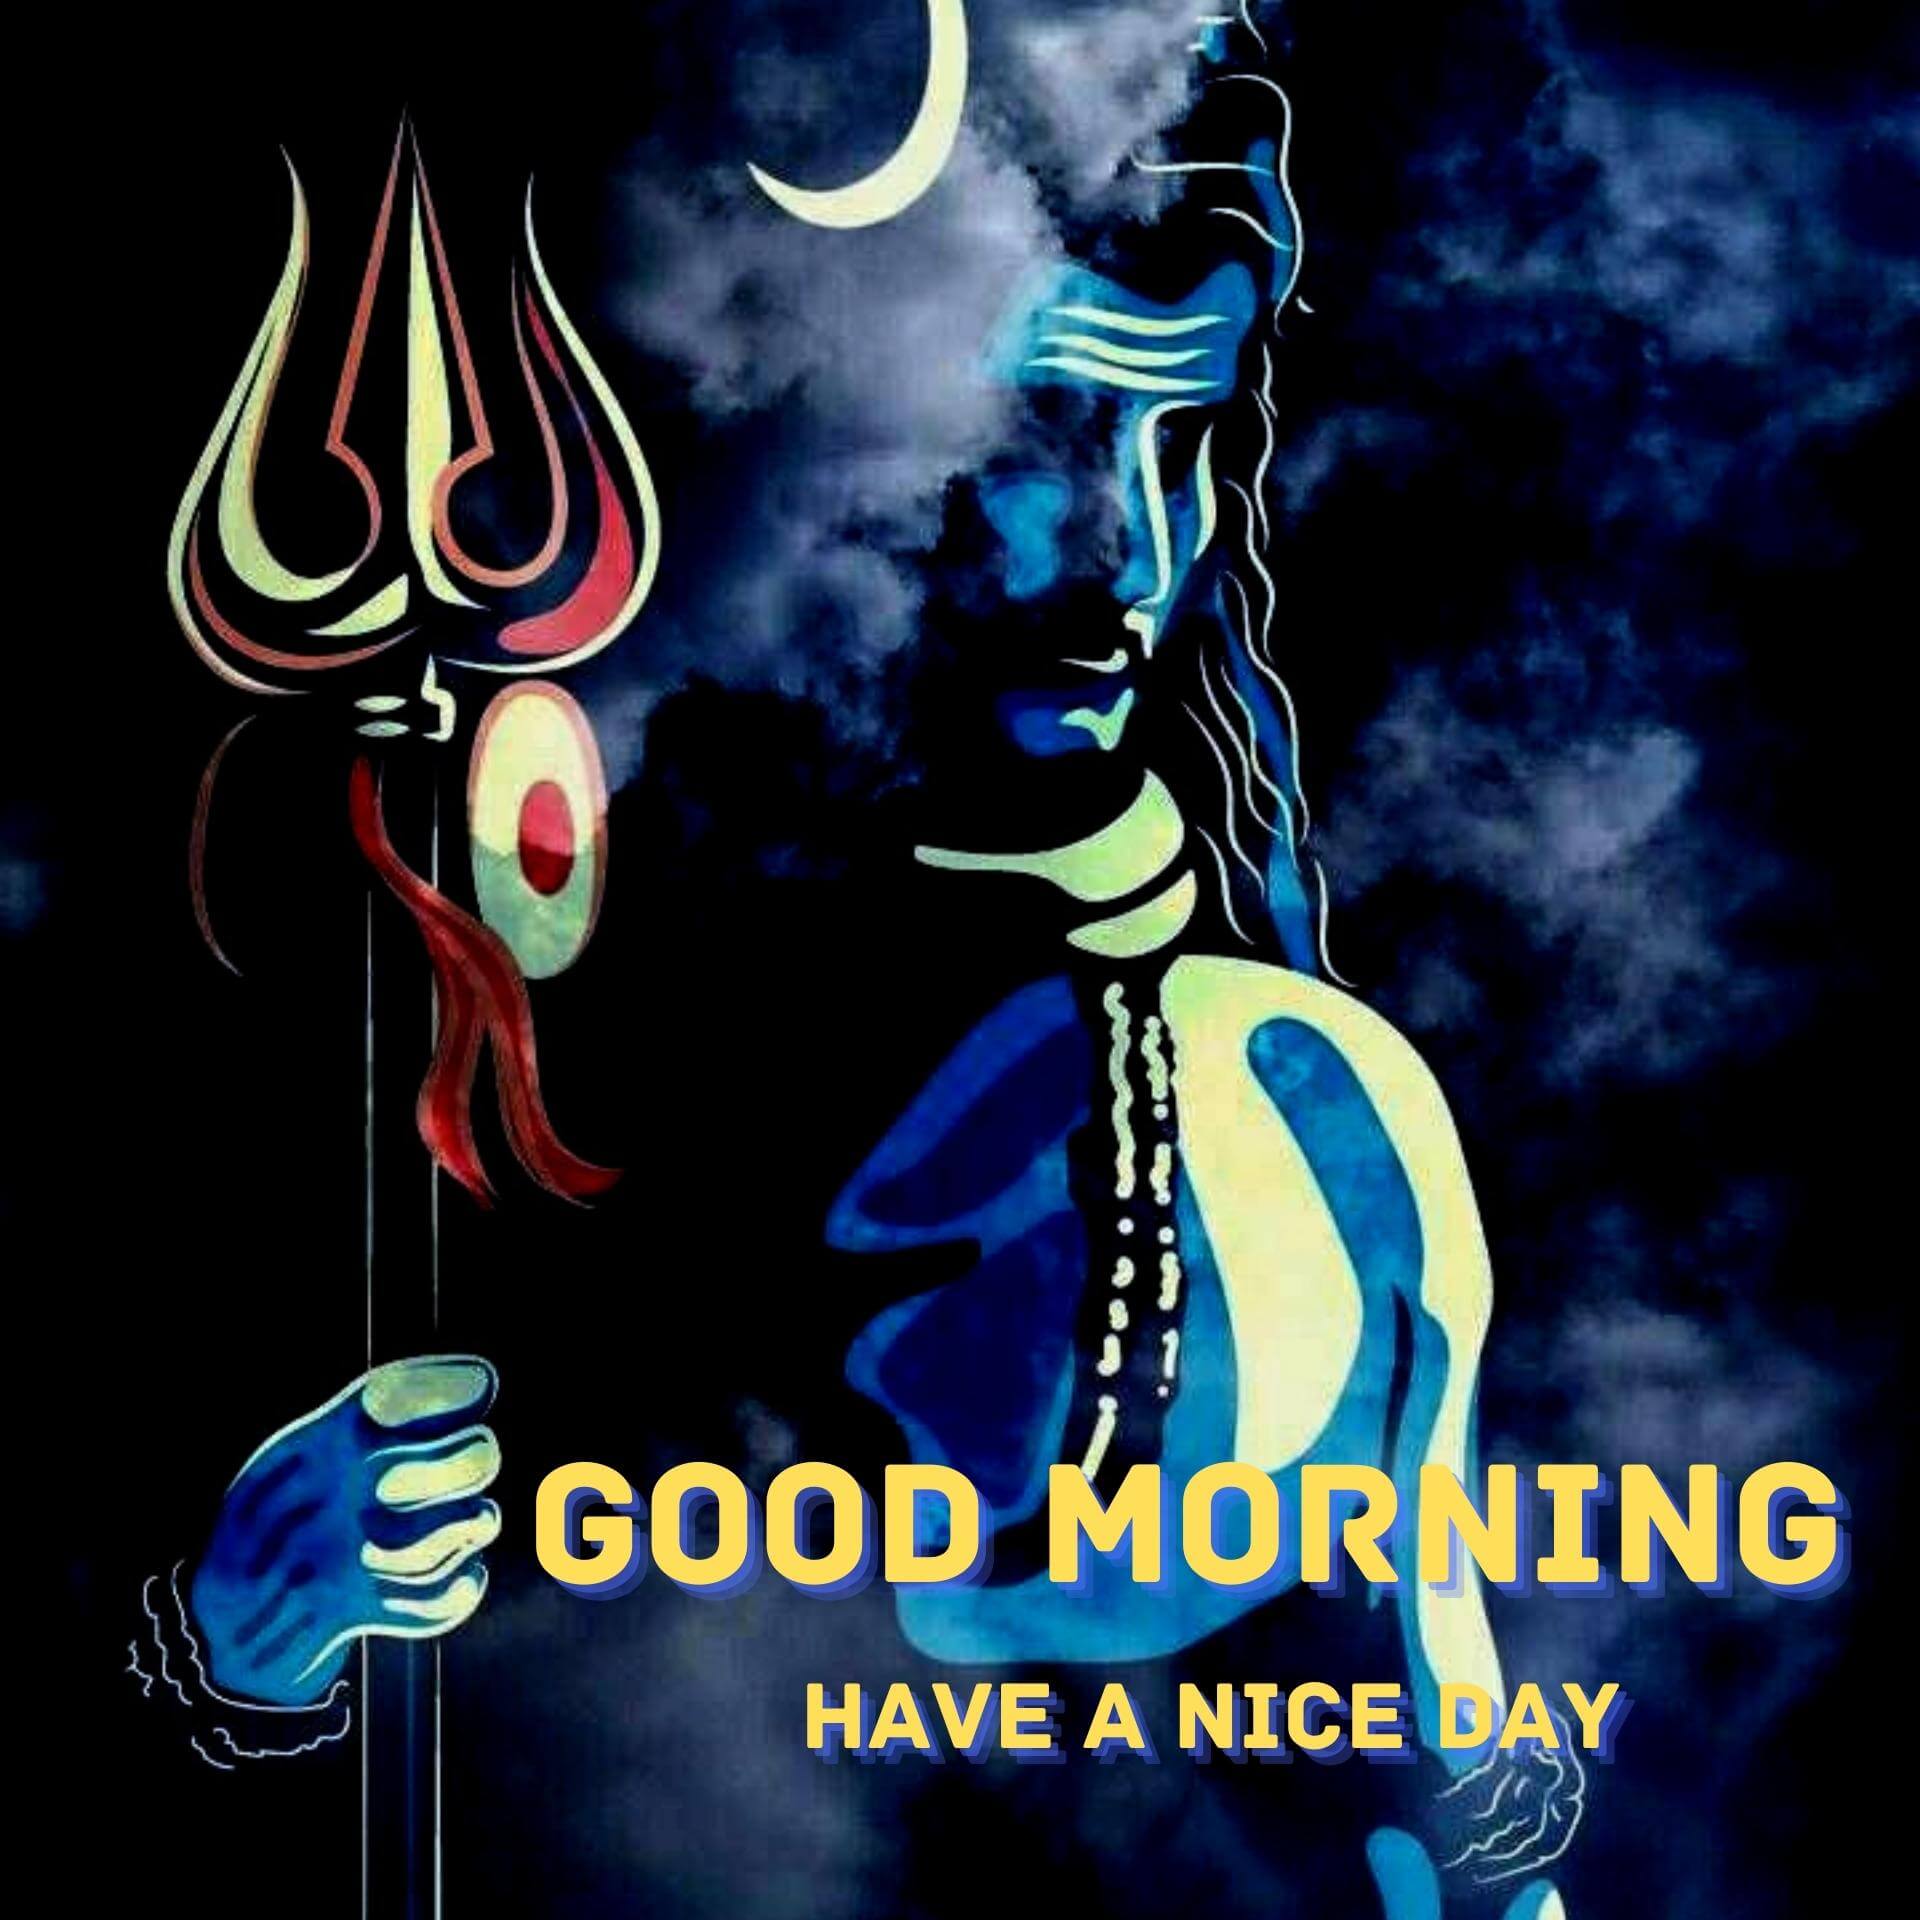 Free New Shiva Good Morning Images Download